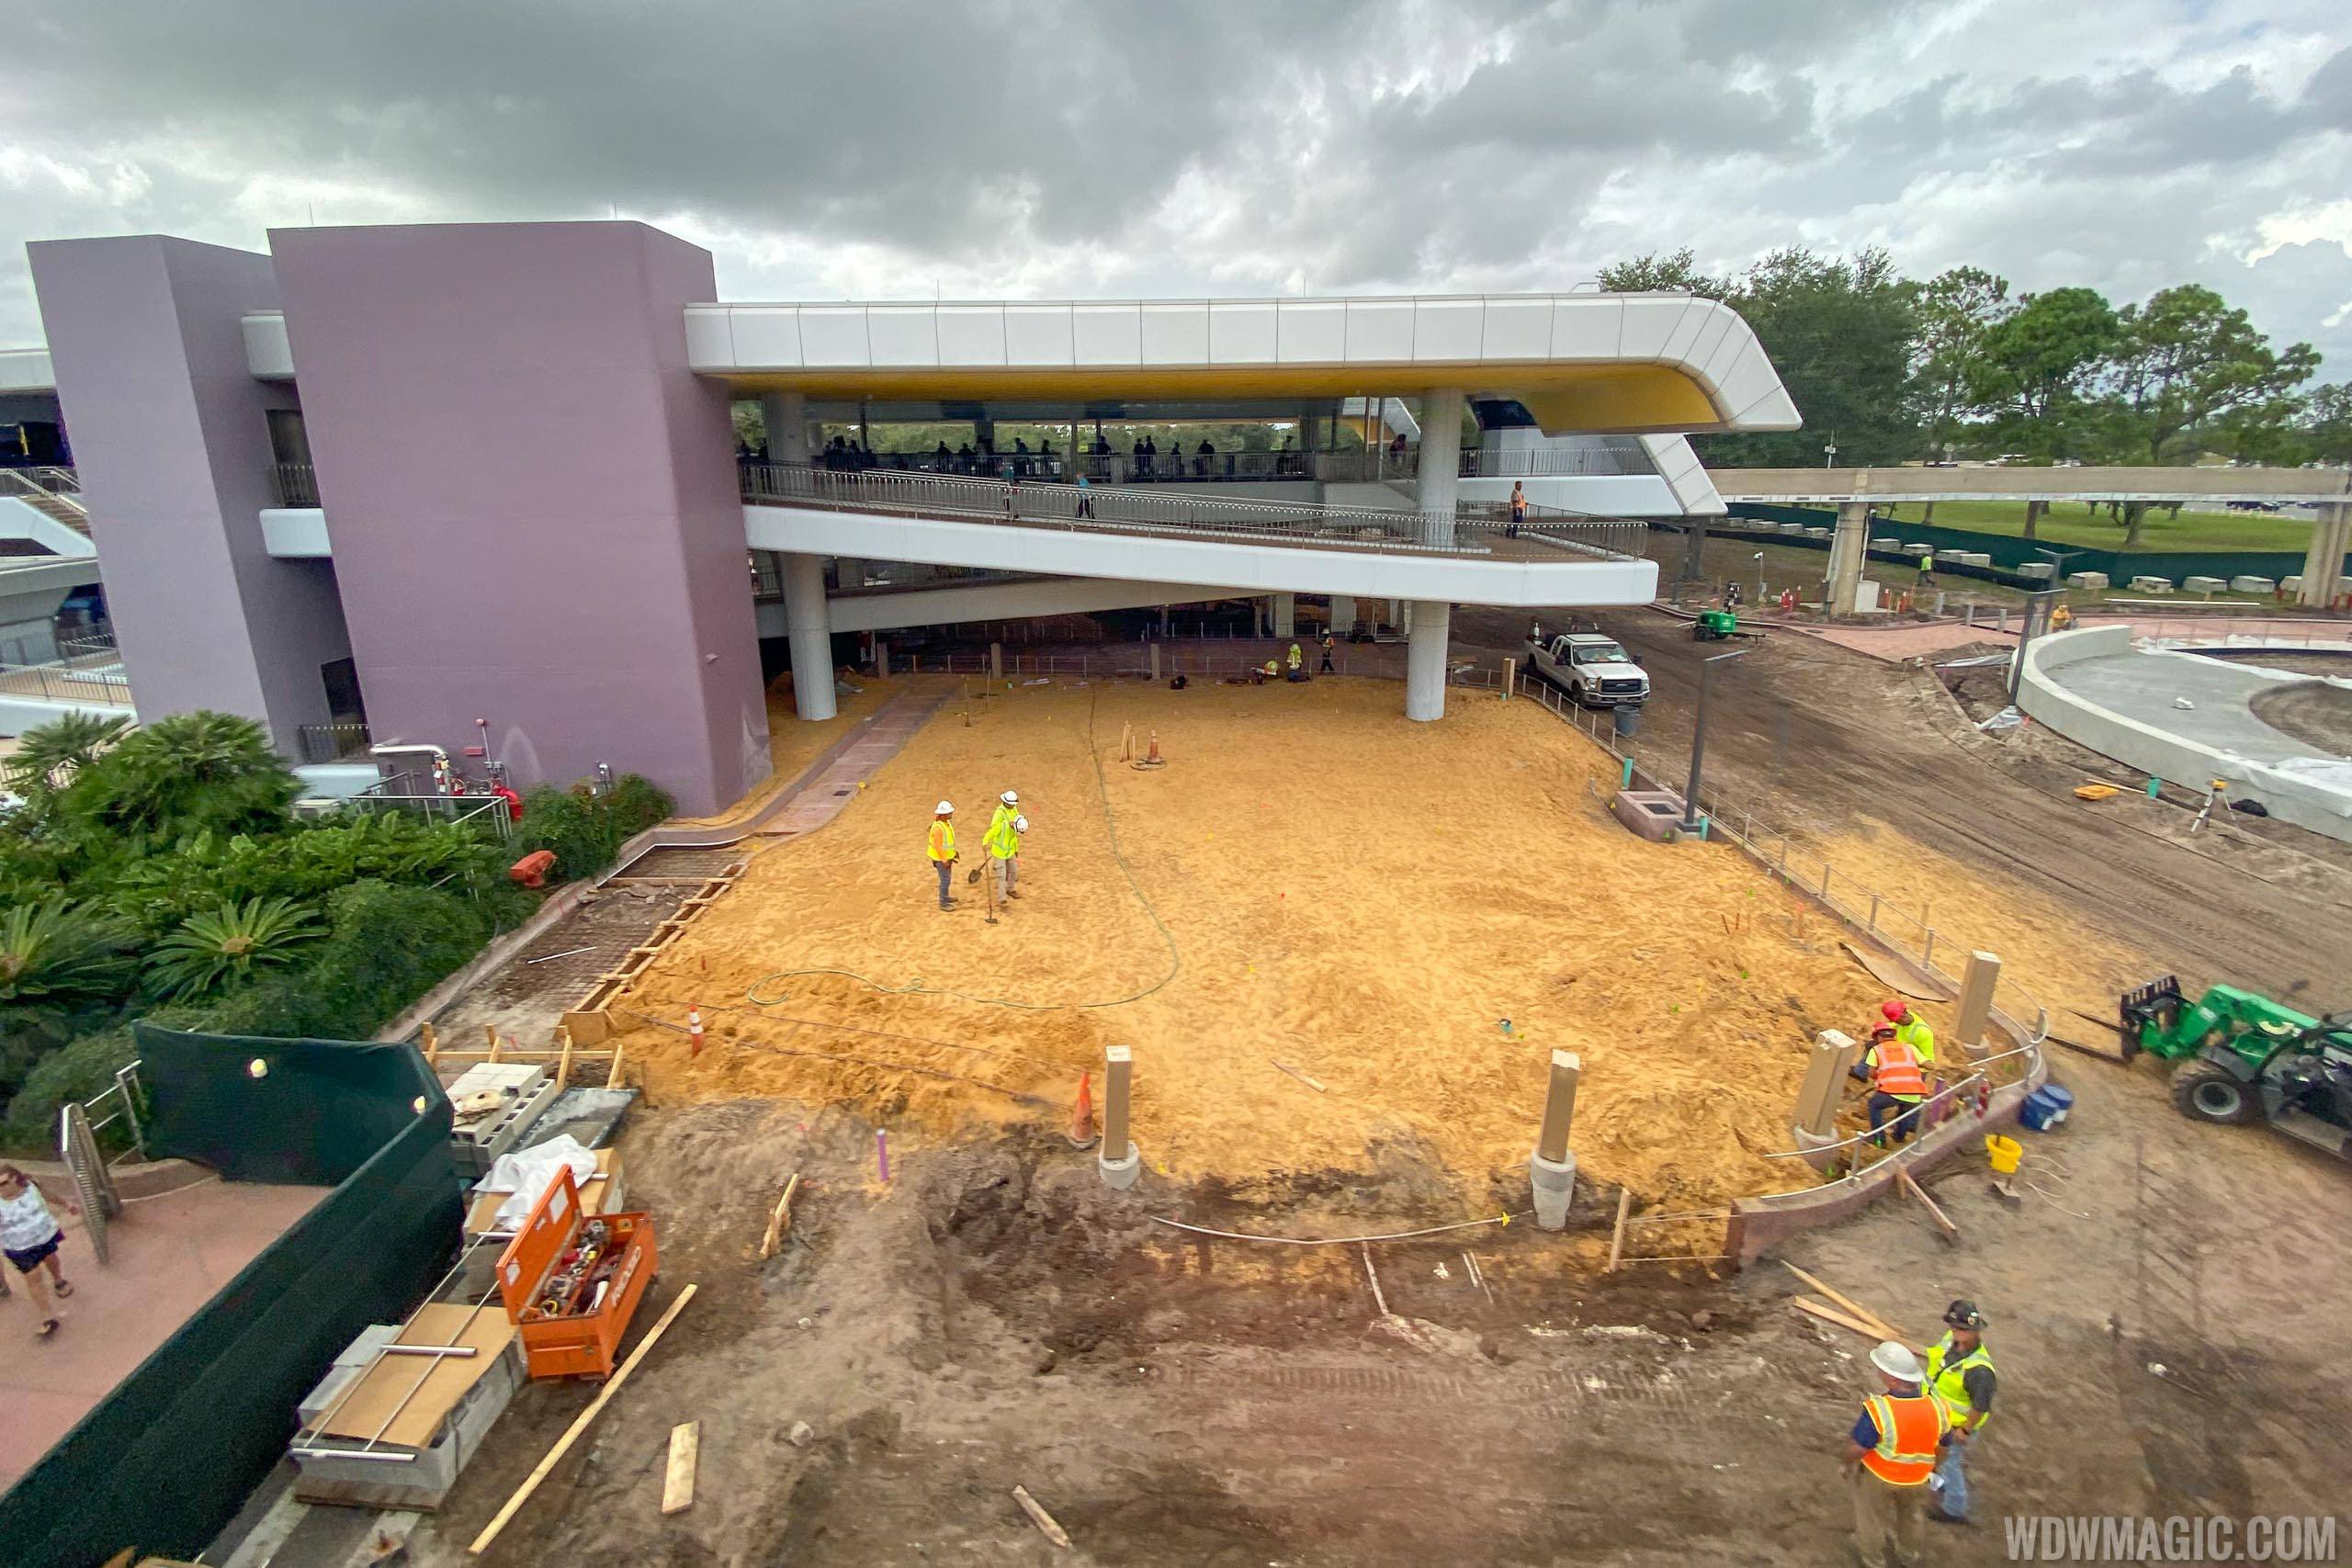 Epcot arrival area October 2019